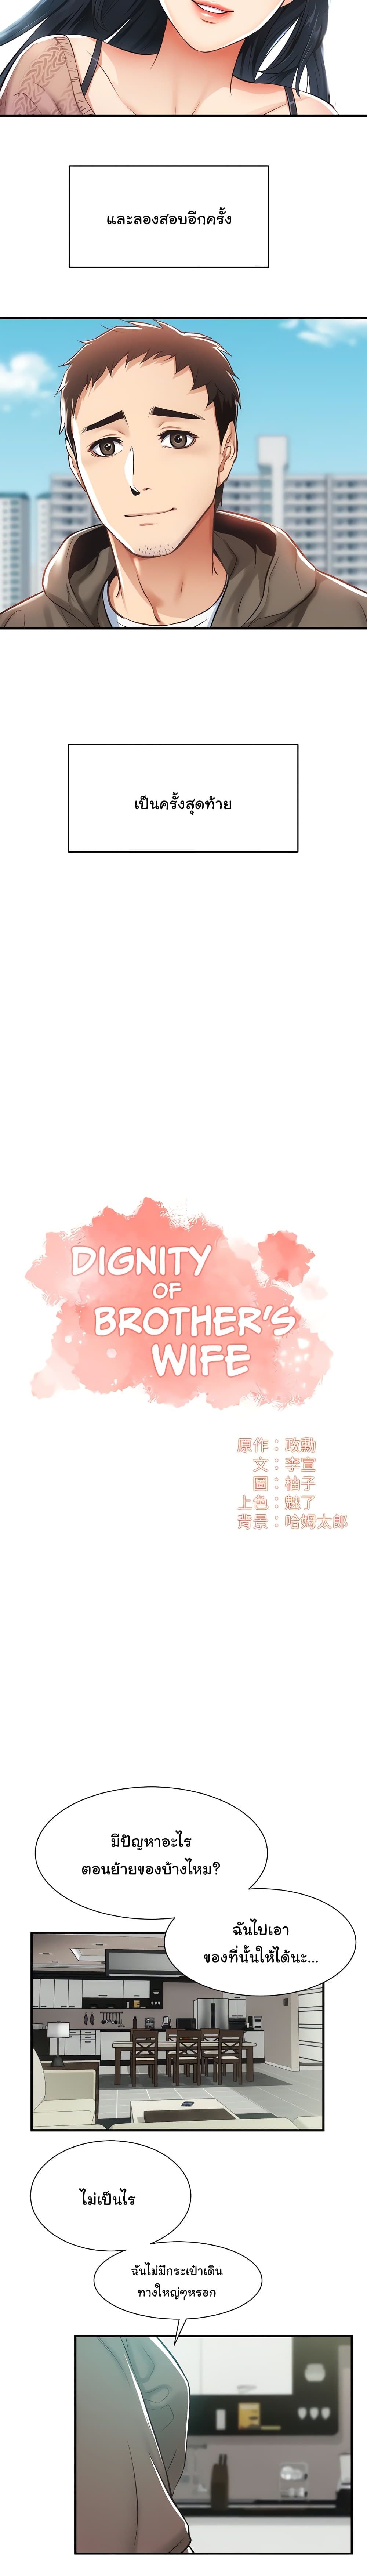 Brother's Wife Dignity 9 (2)